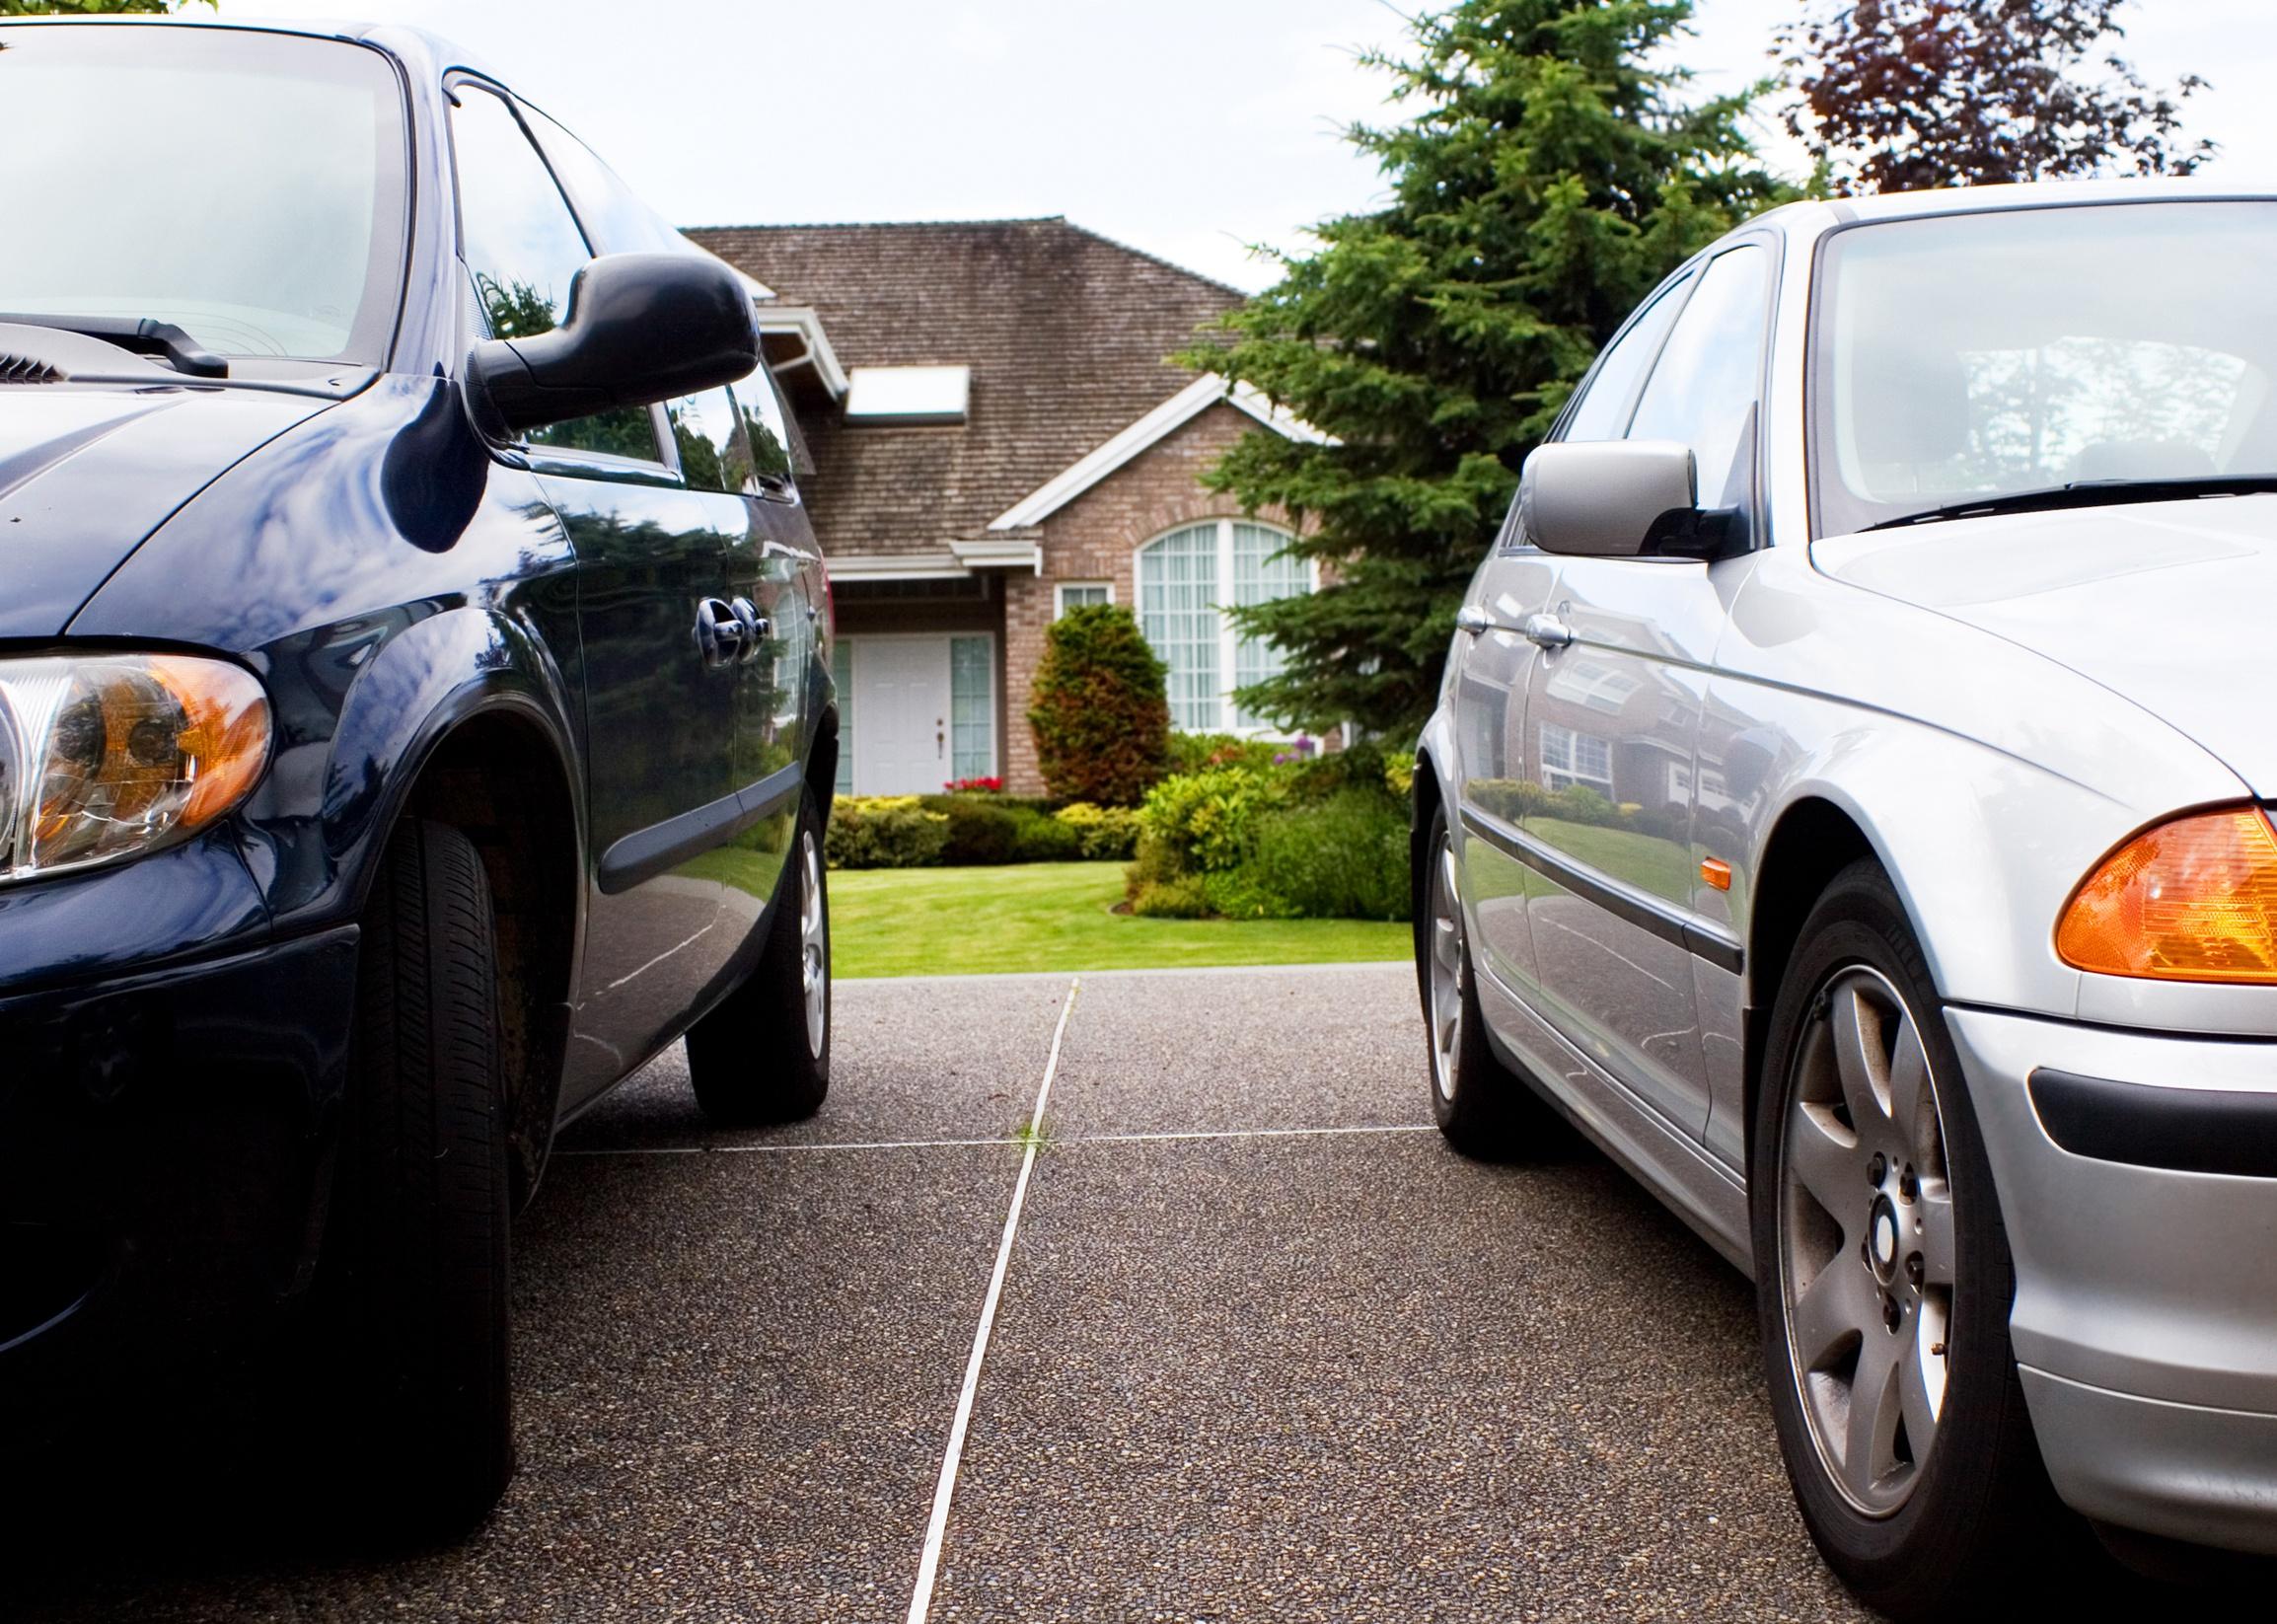 Two cars parked in a driveway.